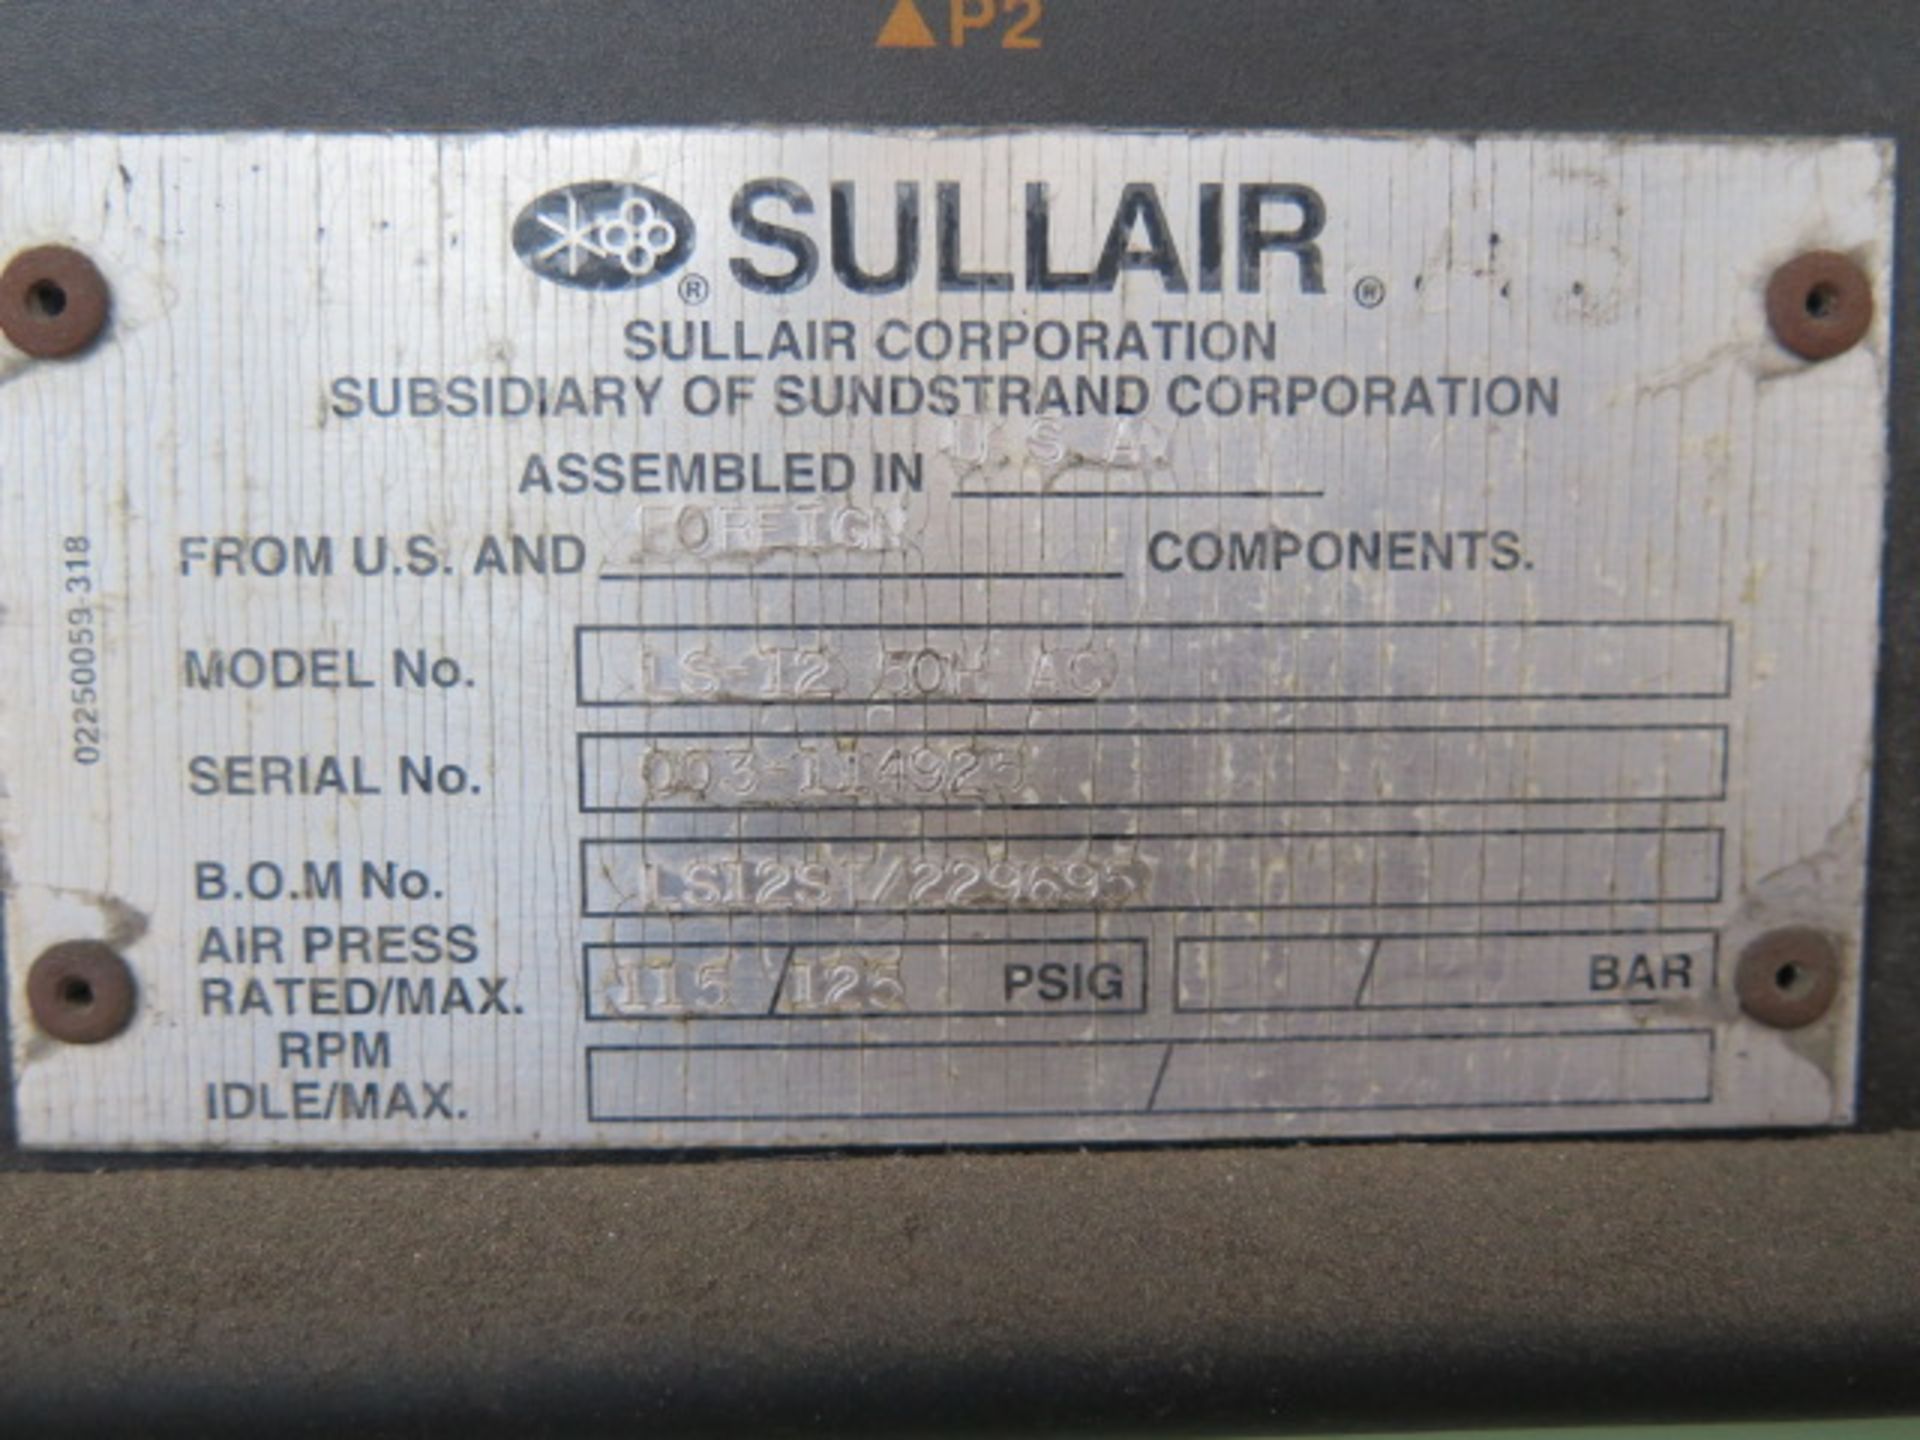 Sullaire LS-12-50H-AC 50Hp Rotary Air Compressor s/n 003-114925 (SOLD AS-IS - NO WARRANTY) - Image 9 of 9